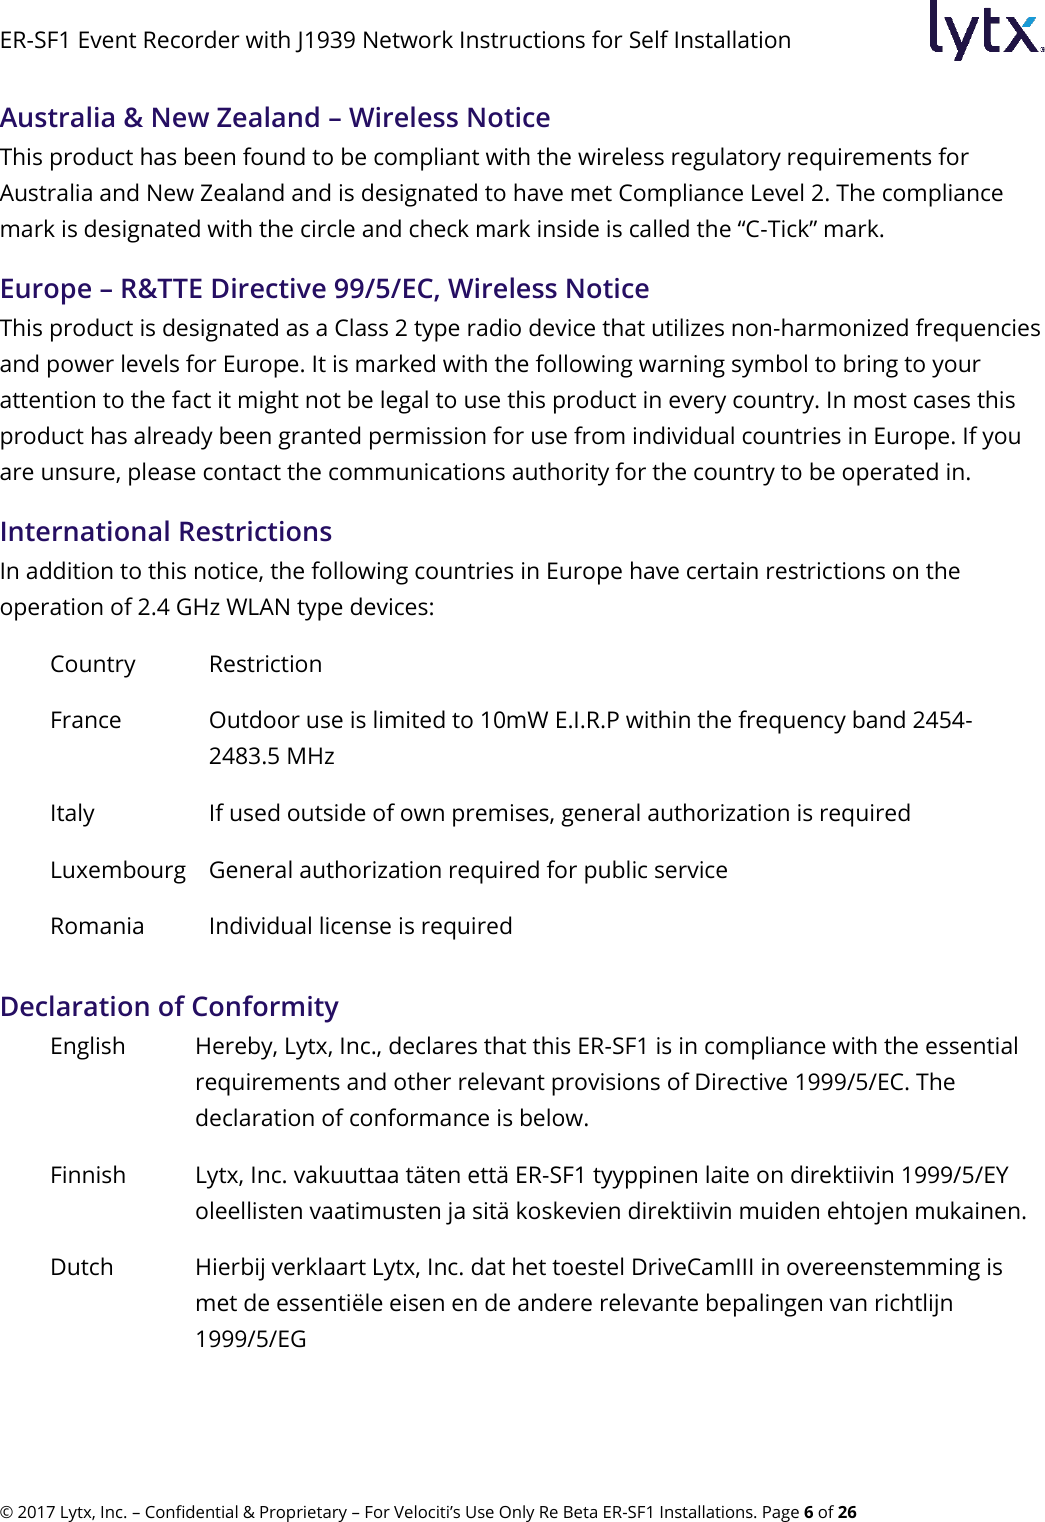 ER-SF1 Event Recorder with J1939 Network Instructions for Self Installation © 2017 Lytx, Inc. – Confidential &amp; Proprietary – For Velociti’s Use Only Re Beta ER-SF1 Installations. Page 6 of 26 Australia &amp; New Zealand – Wireless Notice  This product has been found to be compliant with the wireless regulatory requirements for Australia and New Zealand and is designated to have met Compliance Level 2. The compliance mark is designated with the circle and check mark inside is called the “C-Tick” mark.  Europe – R&amp;TTE Directive 99/5/EC, Wireless Notice  This product is designated as a Class 2 type radio device that utilizes non-harmonized frequencies and power levels for Europe. It is marked with the following warning symbol to bring to your attention to the fact it might not be legal to use this product in every country. In most cases this product has already been granted permission for use from individual countries in Europe. If you are unsure, please contact the communications authority for the country to be operated in.      International Restrictions In addition to this notice, the following countries in Europe have certain restrictions on the operation of 2.4 GHz WLAN type devices: Country Restriction France Outdoor use is limited to 10mW E.I.R.P within the frequency band 2454-2483.5 MHz Italy If used outside of own premises, general authorization is required Luxembourg General authorization required for public service Romania Individual license is required Declaration of Conformity English Hereby, Lytx, Inc., declares that this ER-SF1 is in compliance with the essential requirements and other relevant provisions of Directive 1999/5/EC. The declaration of conformance is below. Finnish Lytx, Inc. vakuuttaa täten että ER-SF1 tyyppinen laite on direktiivin 1999/5/EY oleellisten vaatimusten ja sitä koskevien direktiivin muiden ehtojen mukainen. Dutch Hierbij verklaart Lytx, Inc. dat het toestel DriveCamIII in overeenstemming is met de essentiële eisen en de andere relevante bepalingen van richtlijn 1999/5/EG 